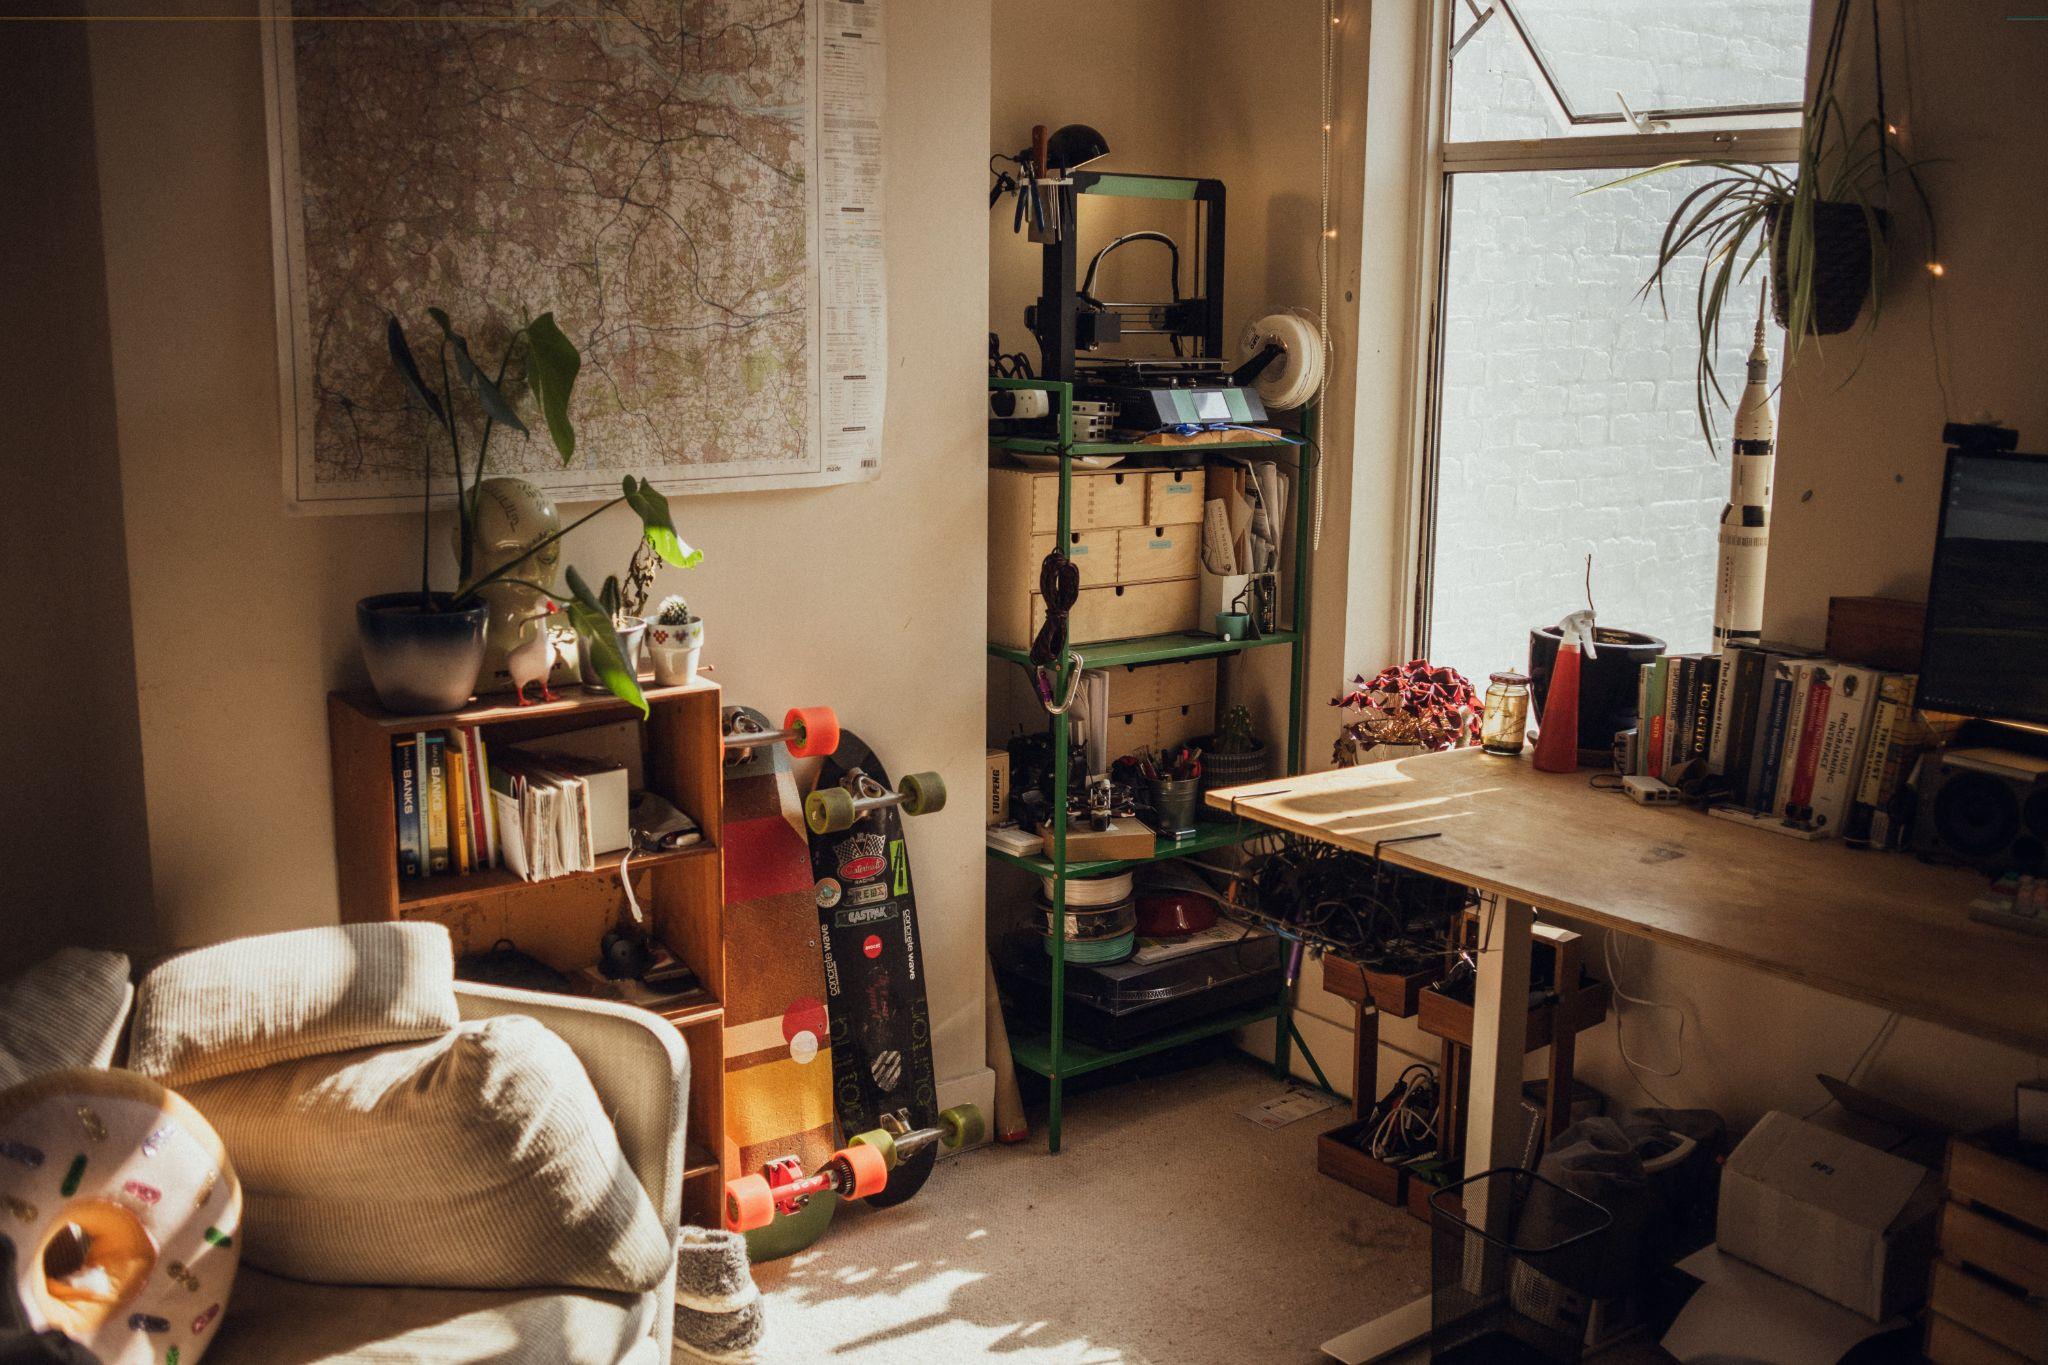 9 Steps to Cleaning Up a Cluttered Living Space